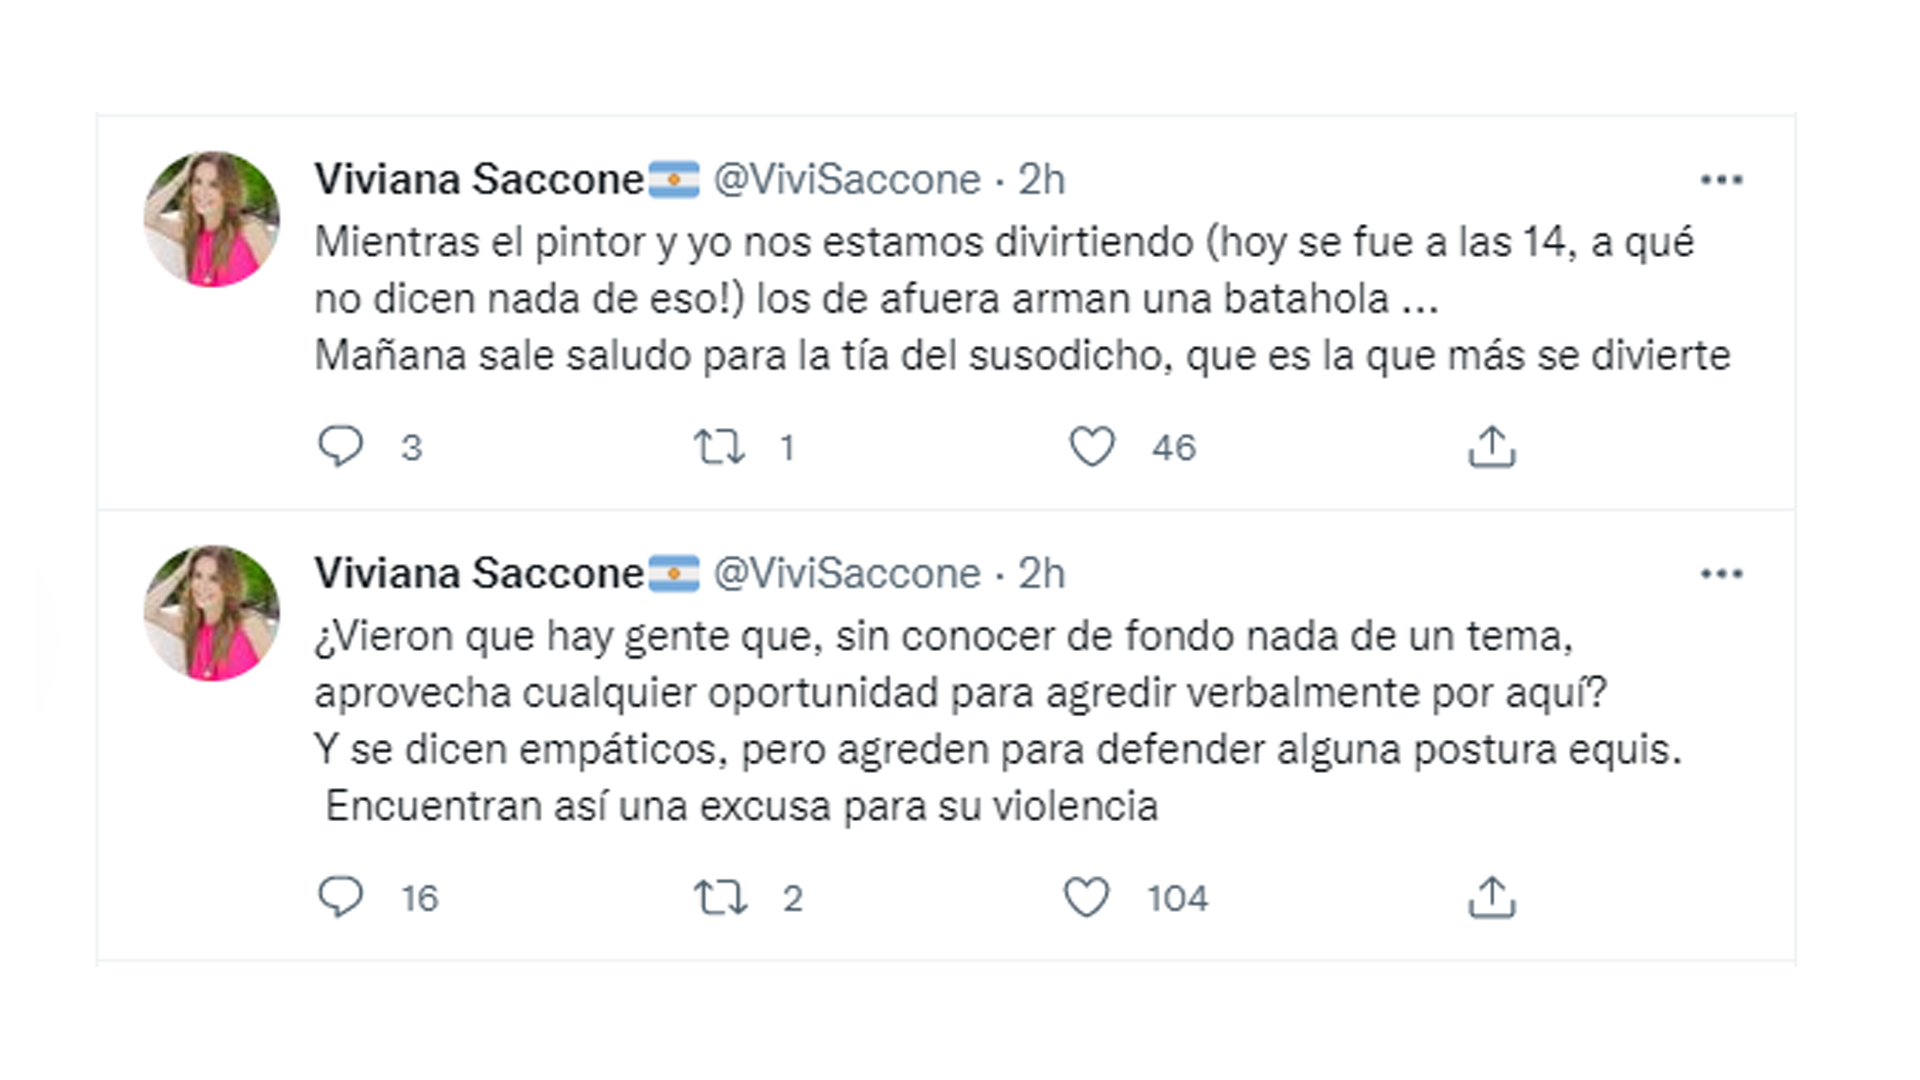 Viviana Saccone's reflection after receiving criticism for her tweet about the painter